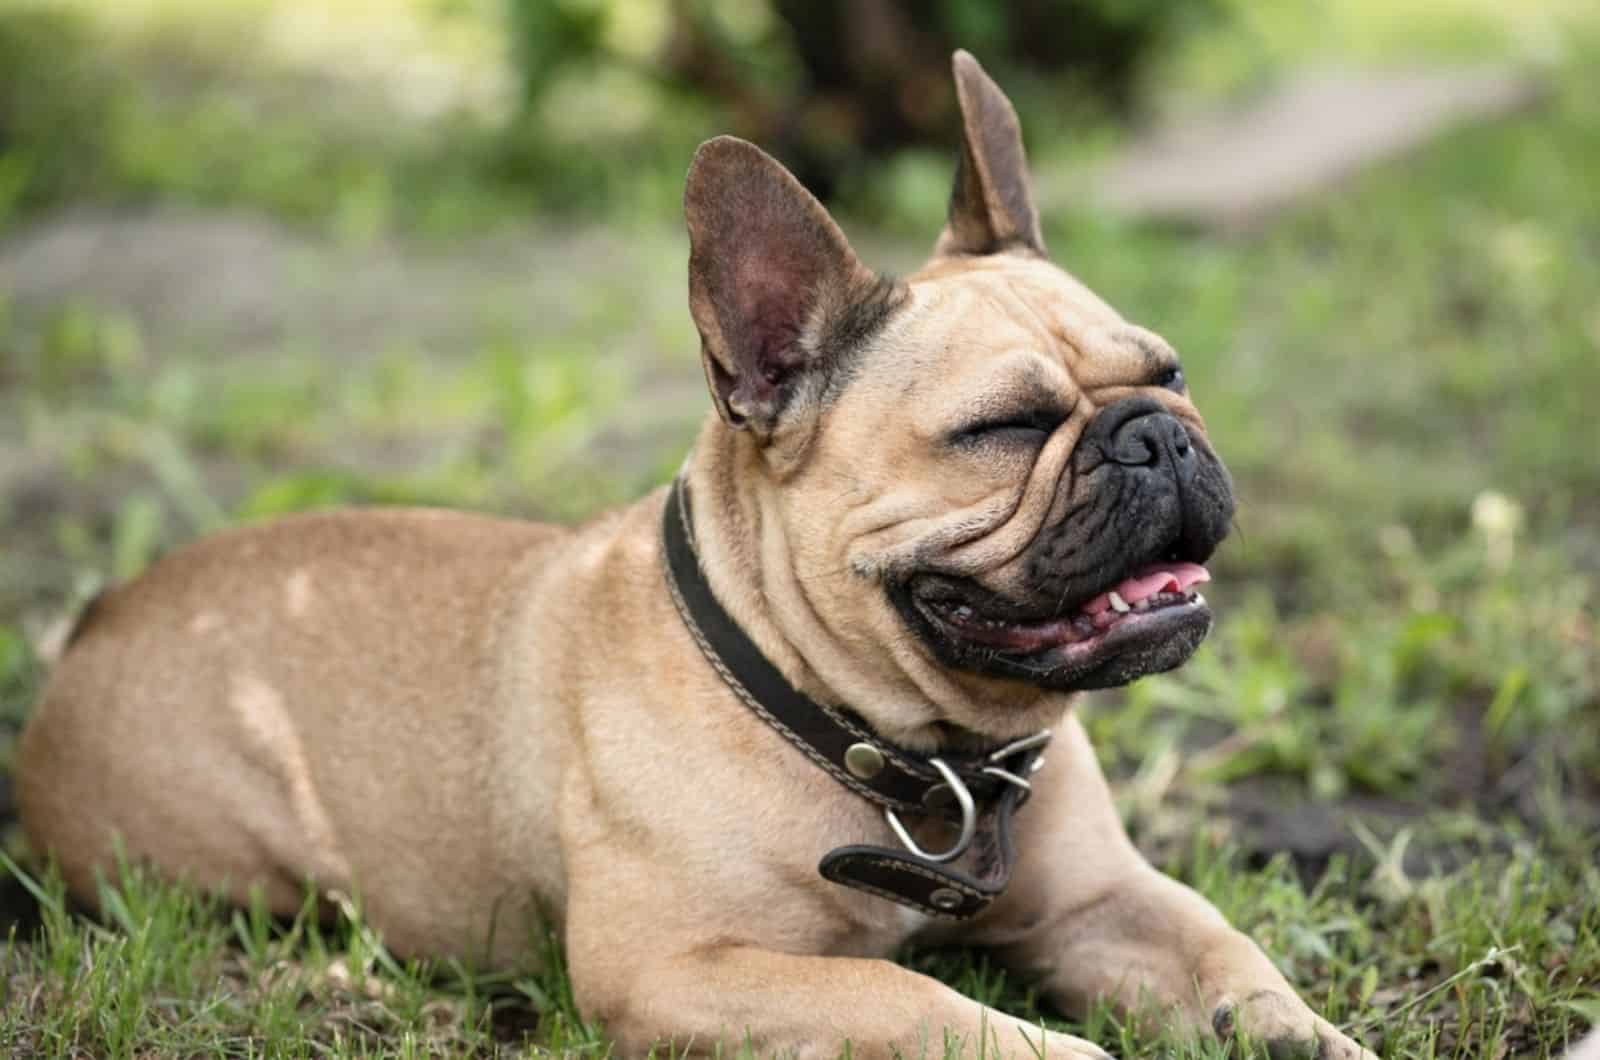 french bulldog lying on the grass and snorting